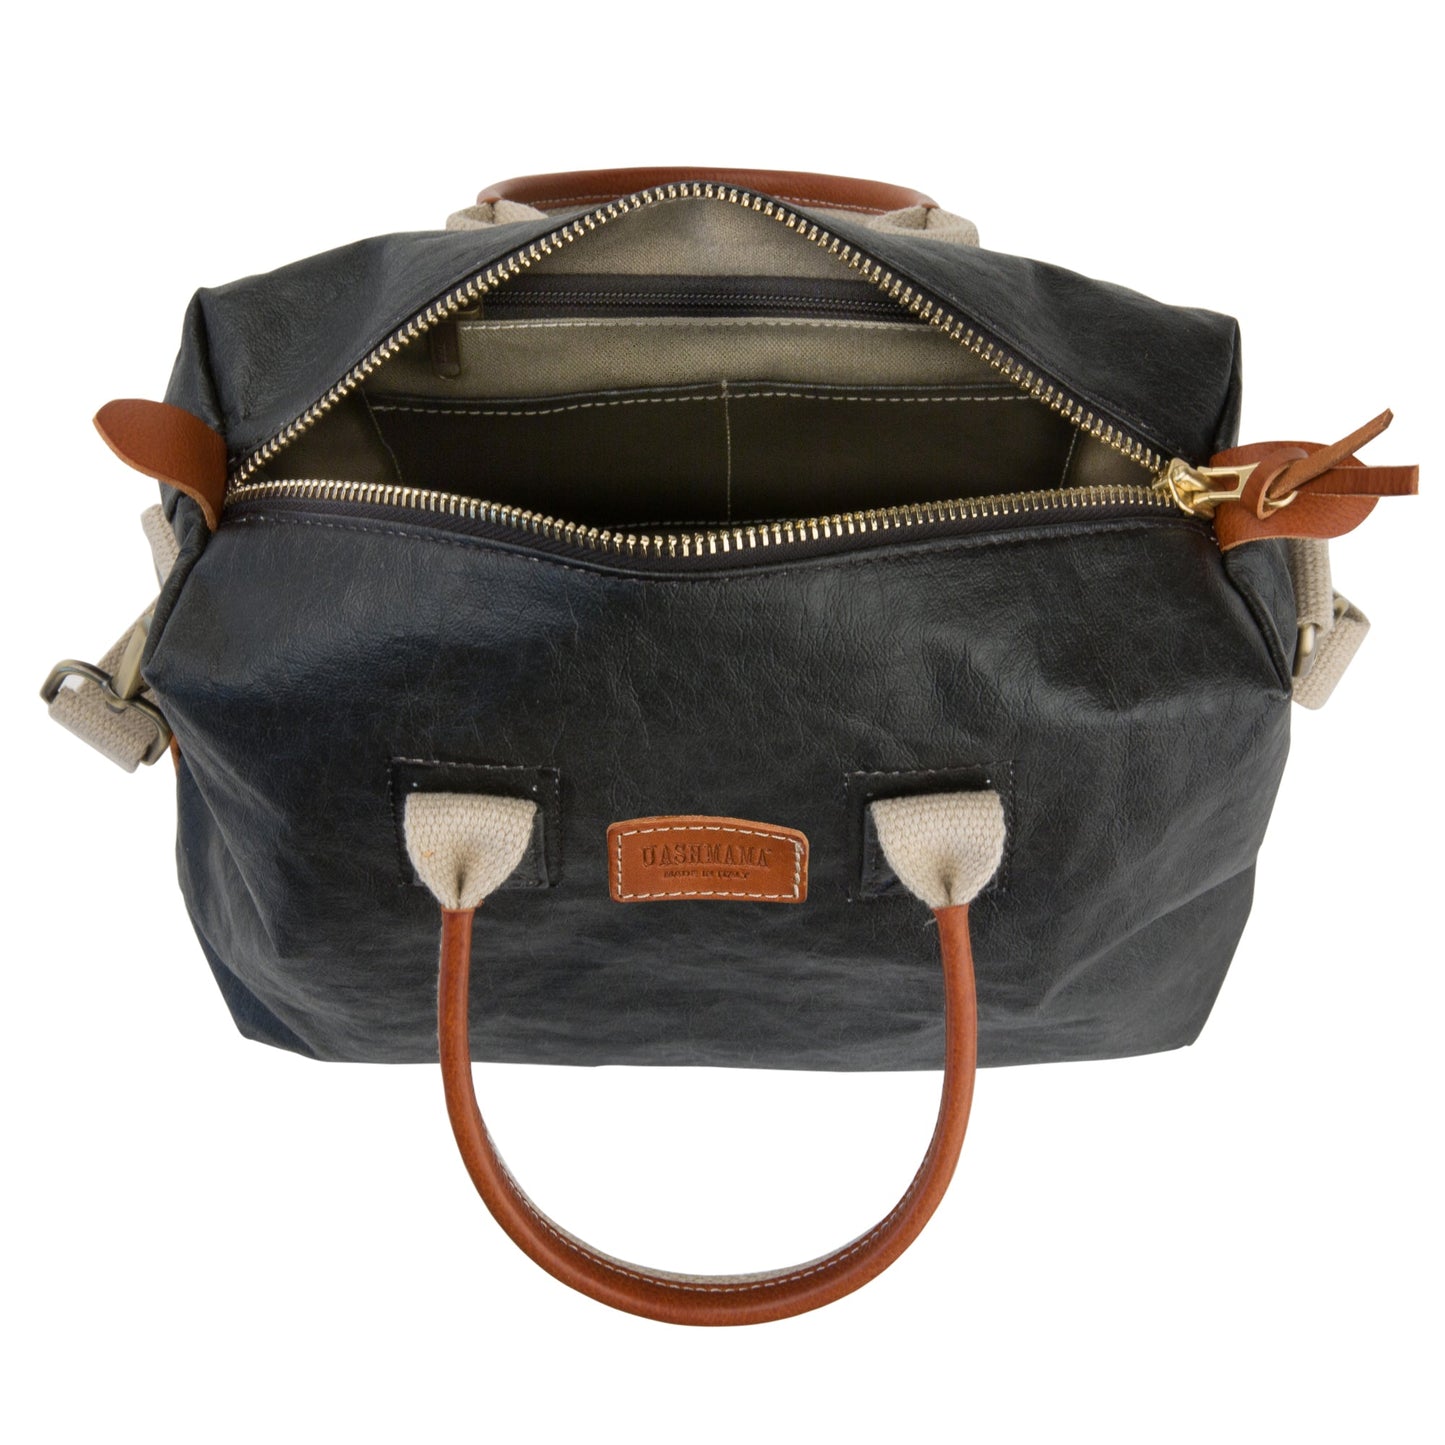 A small washable paper holdall is shown from above with the zip open. This shows an internal zipped pocket, two smaller pockets and organic cotton lining. The bag has two recycled cotton carry handles and a recycled cotton shoulder strap. The bag shown is black.